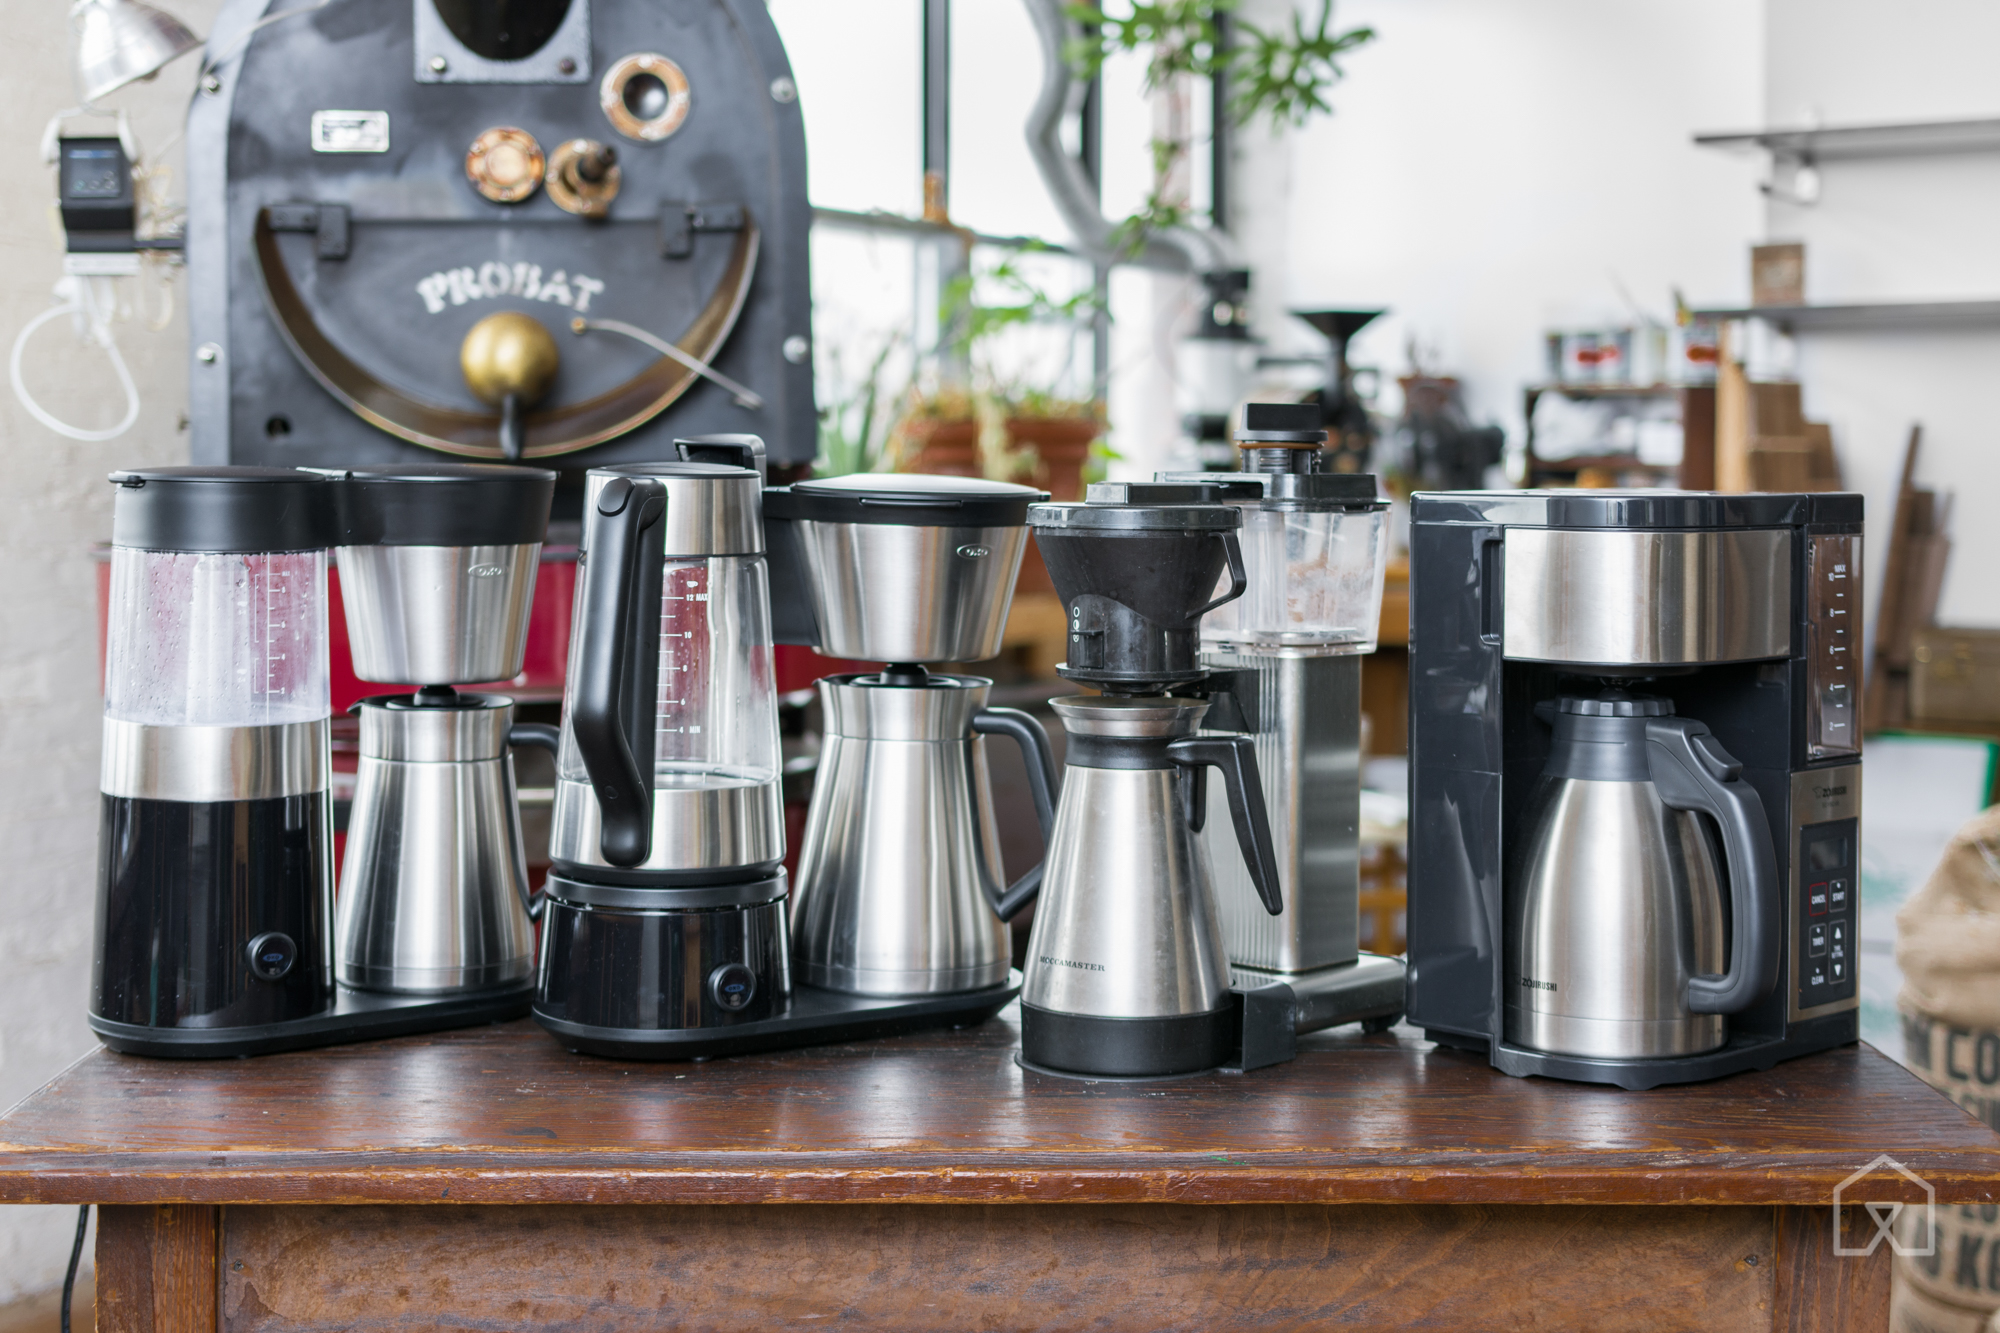 The best coffee maker